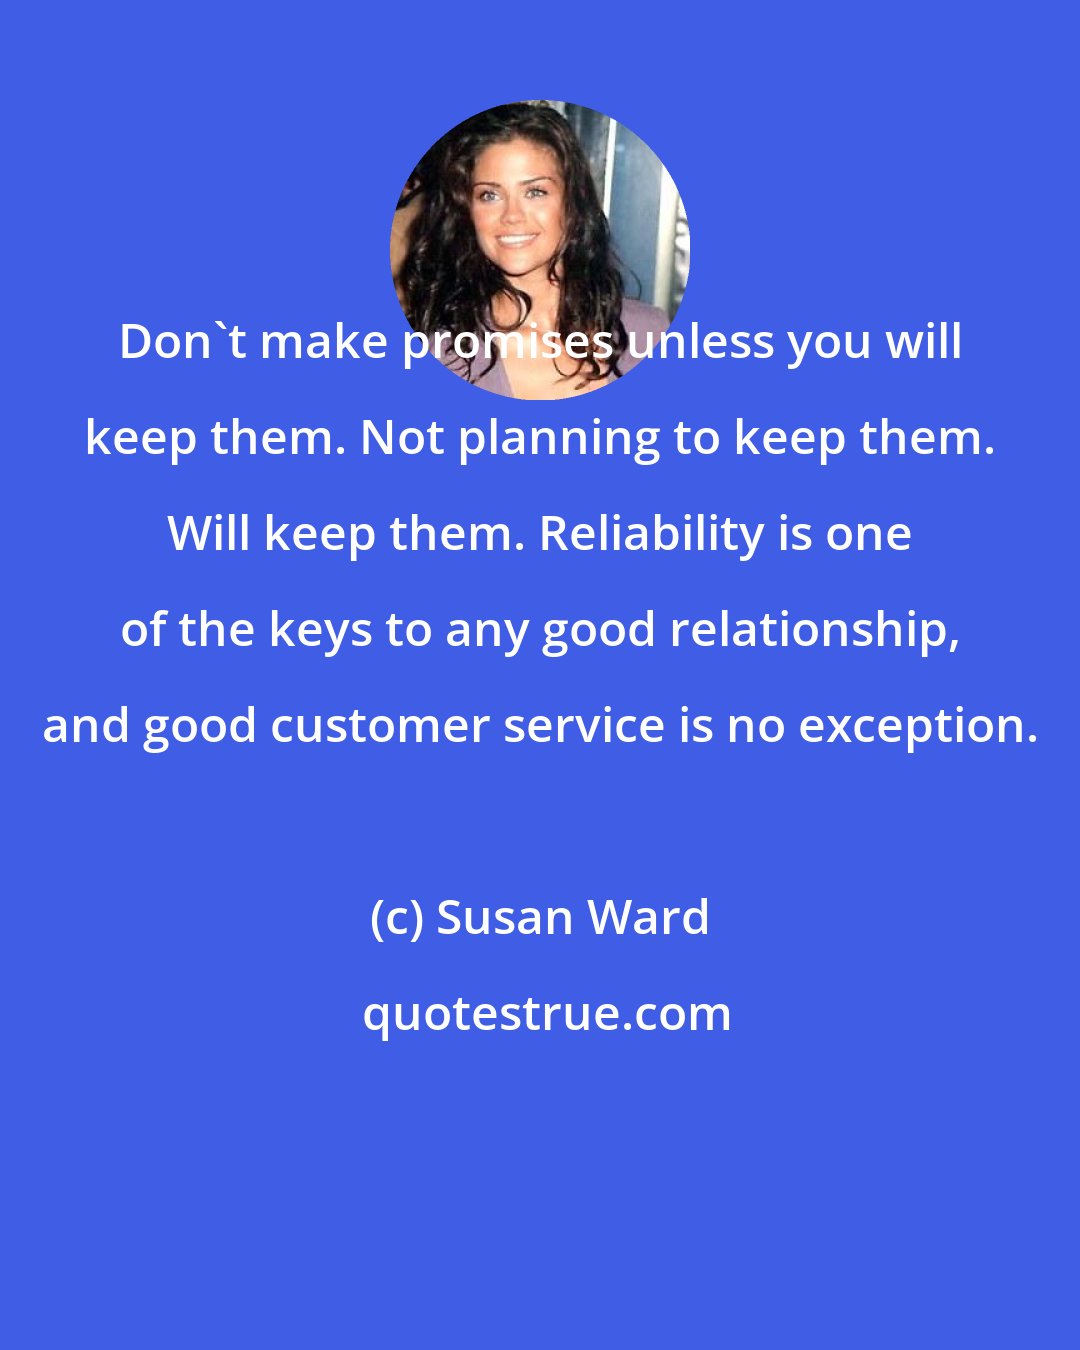 Susan Ward: Don't make promises unless you will keep them. Not planning to keep them. Will keep them. Reliability is one of the keys to any good relationship, and good customer service is no exception.